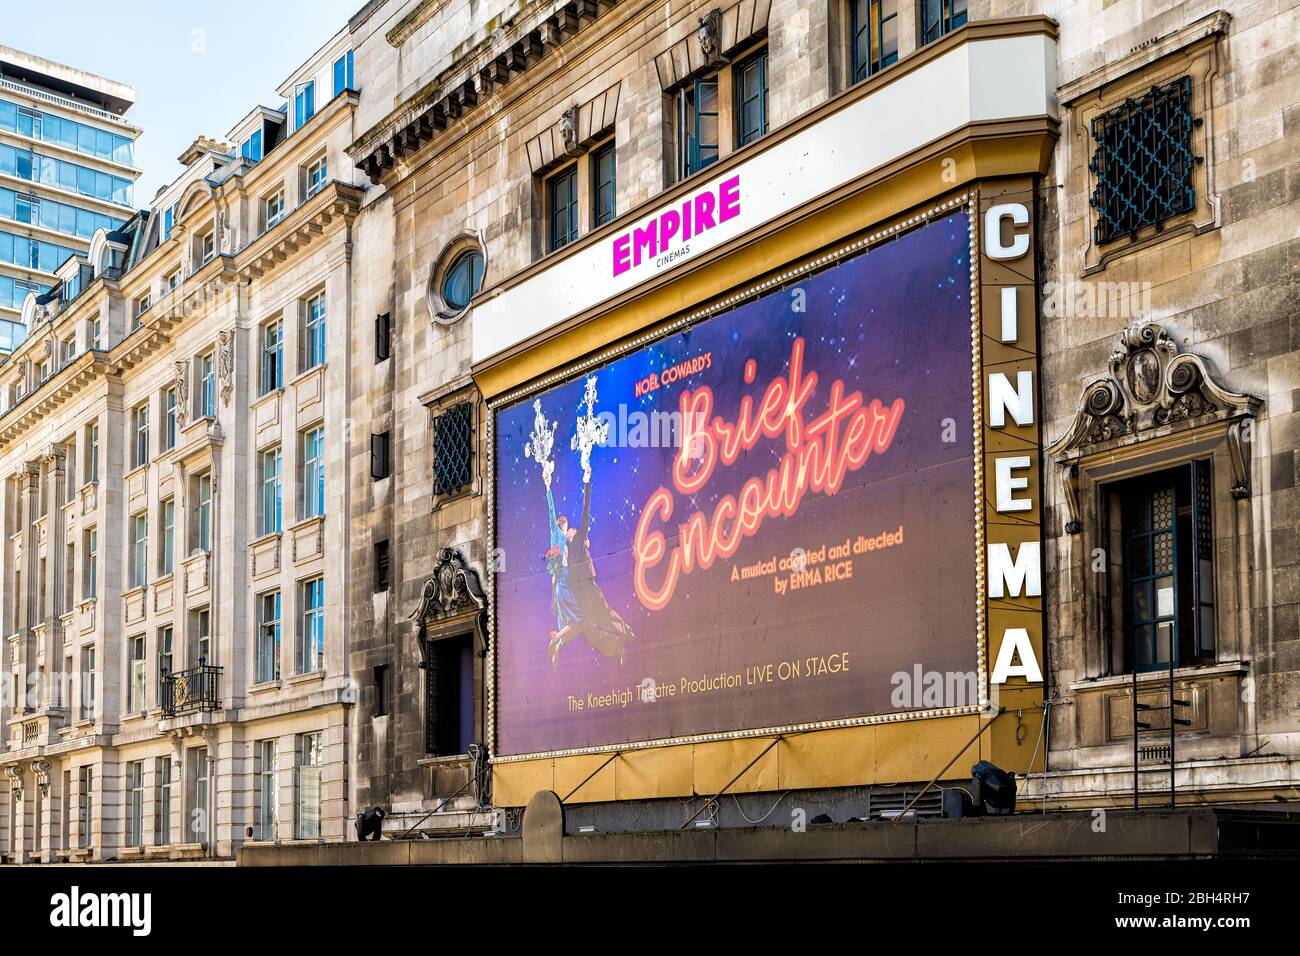 London, UK - June 22, 2018: Empire cinema in London with historic sign on exterior facade architecture on Regent street with Brief Encounter advertise Stock Photo